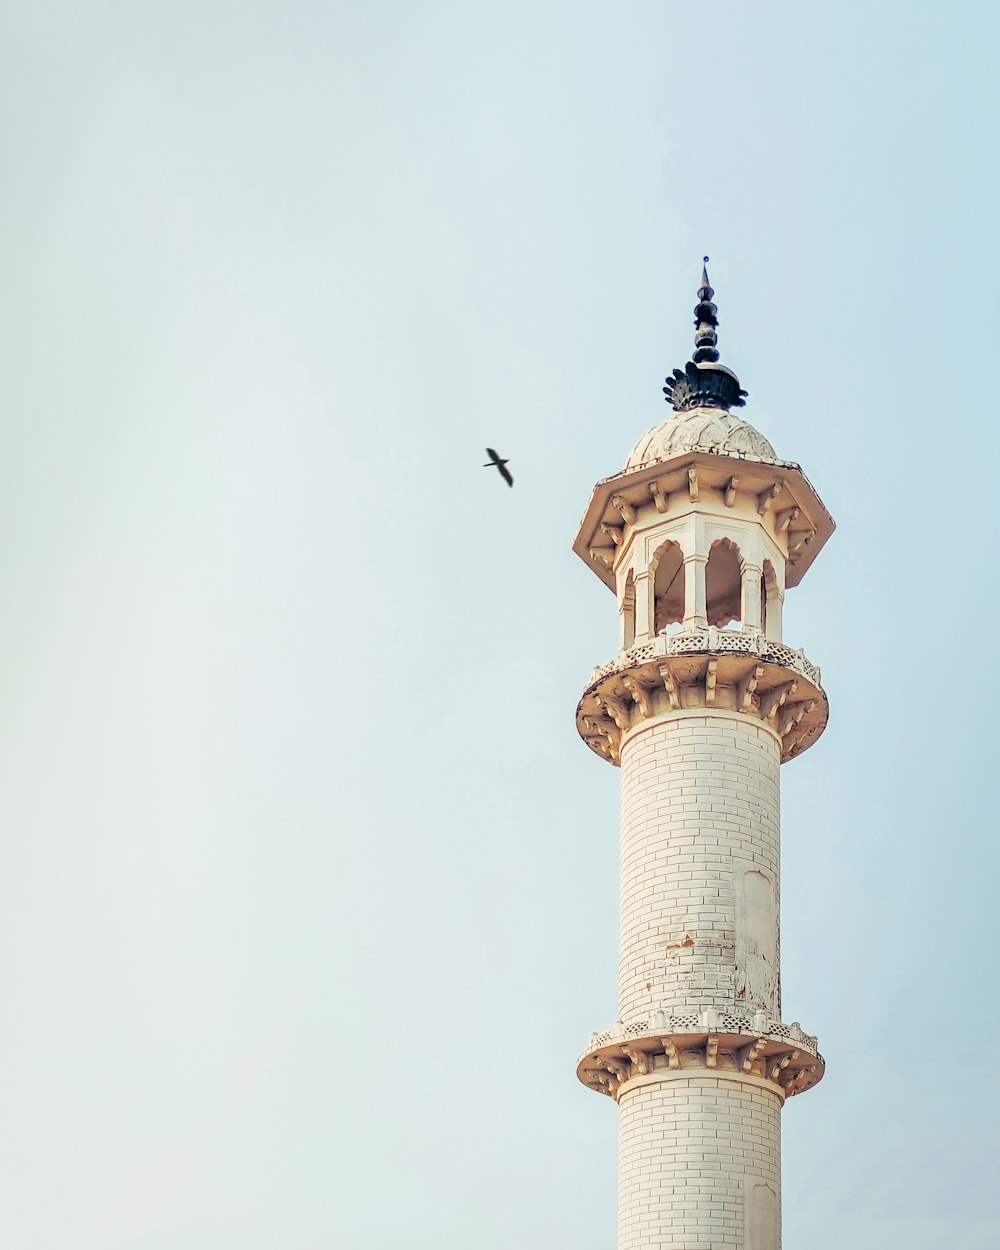 a tall tower with a bird flying over it